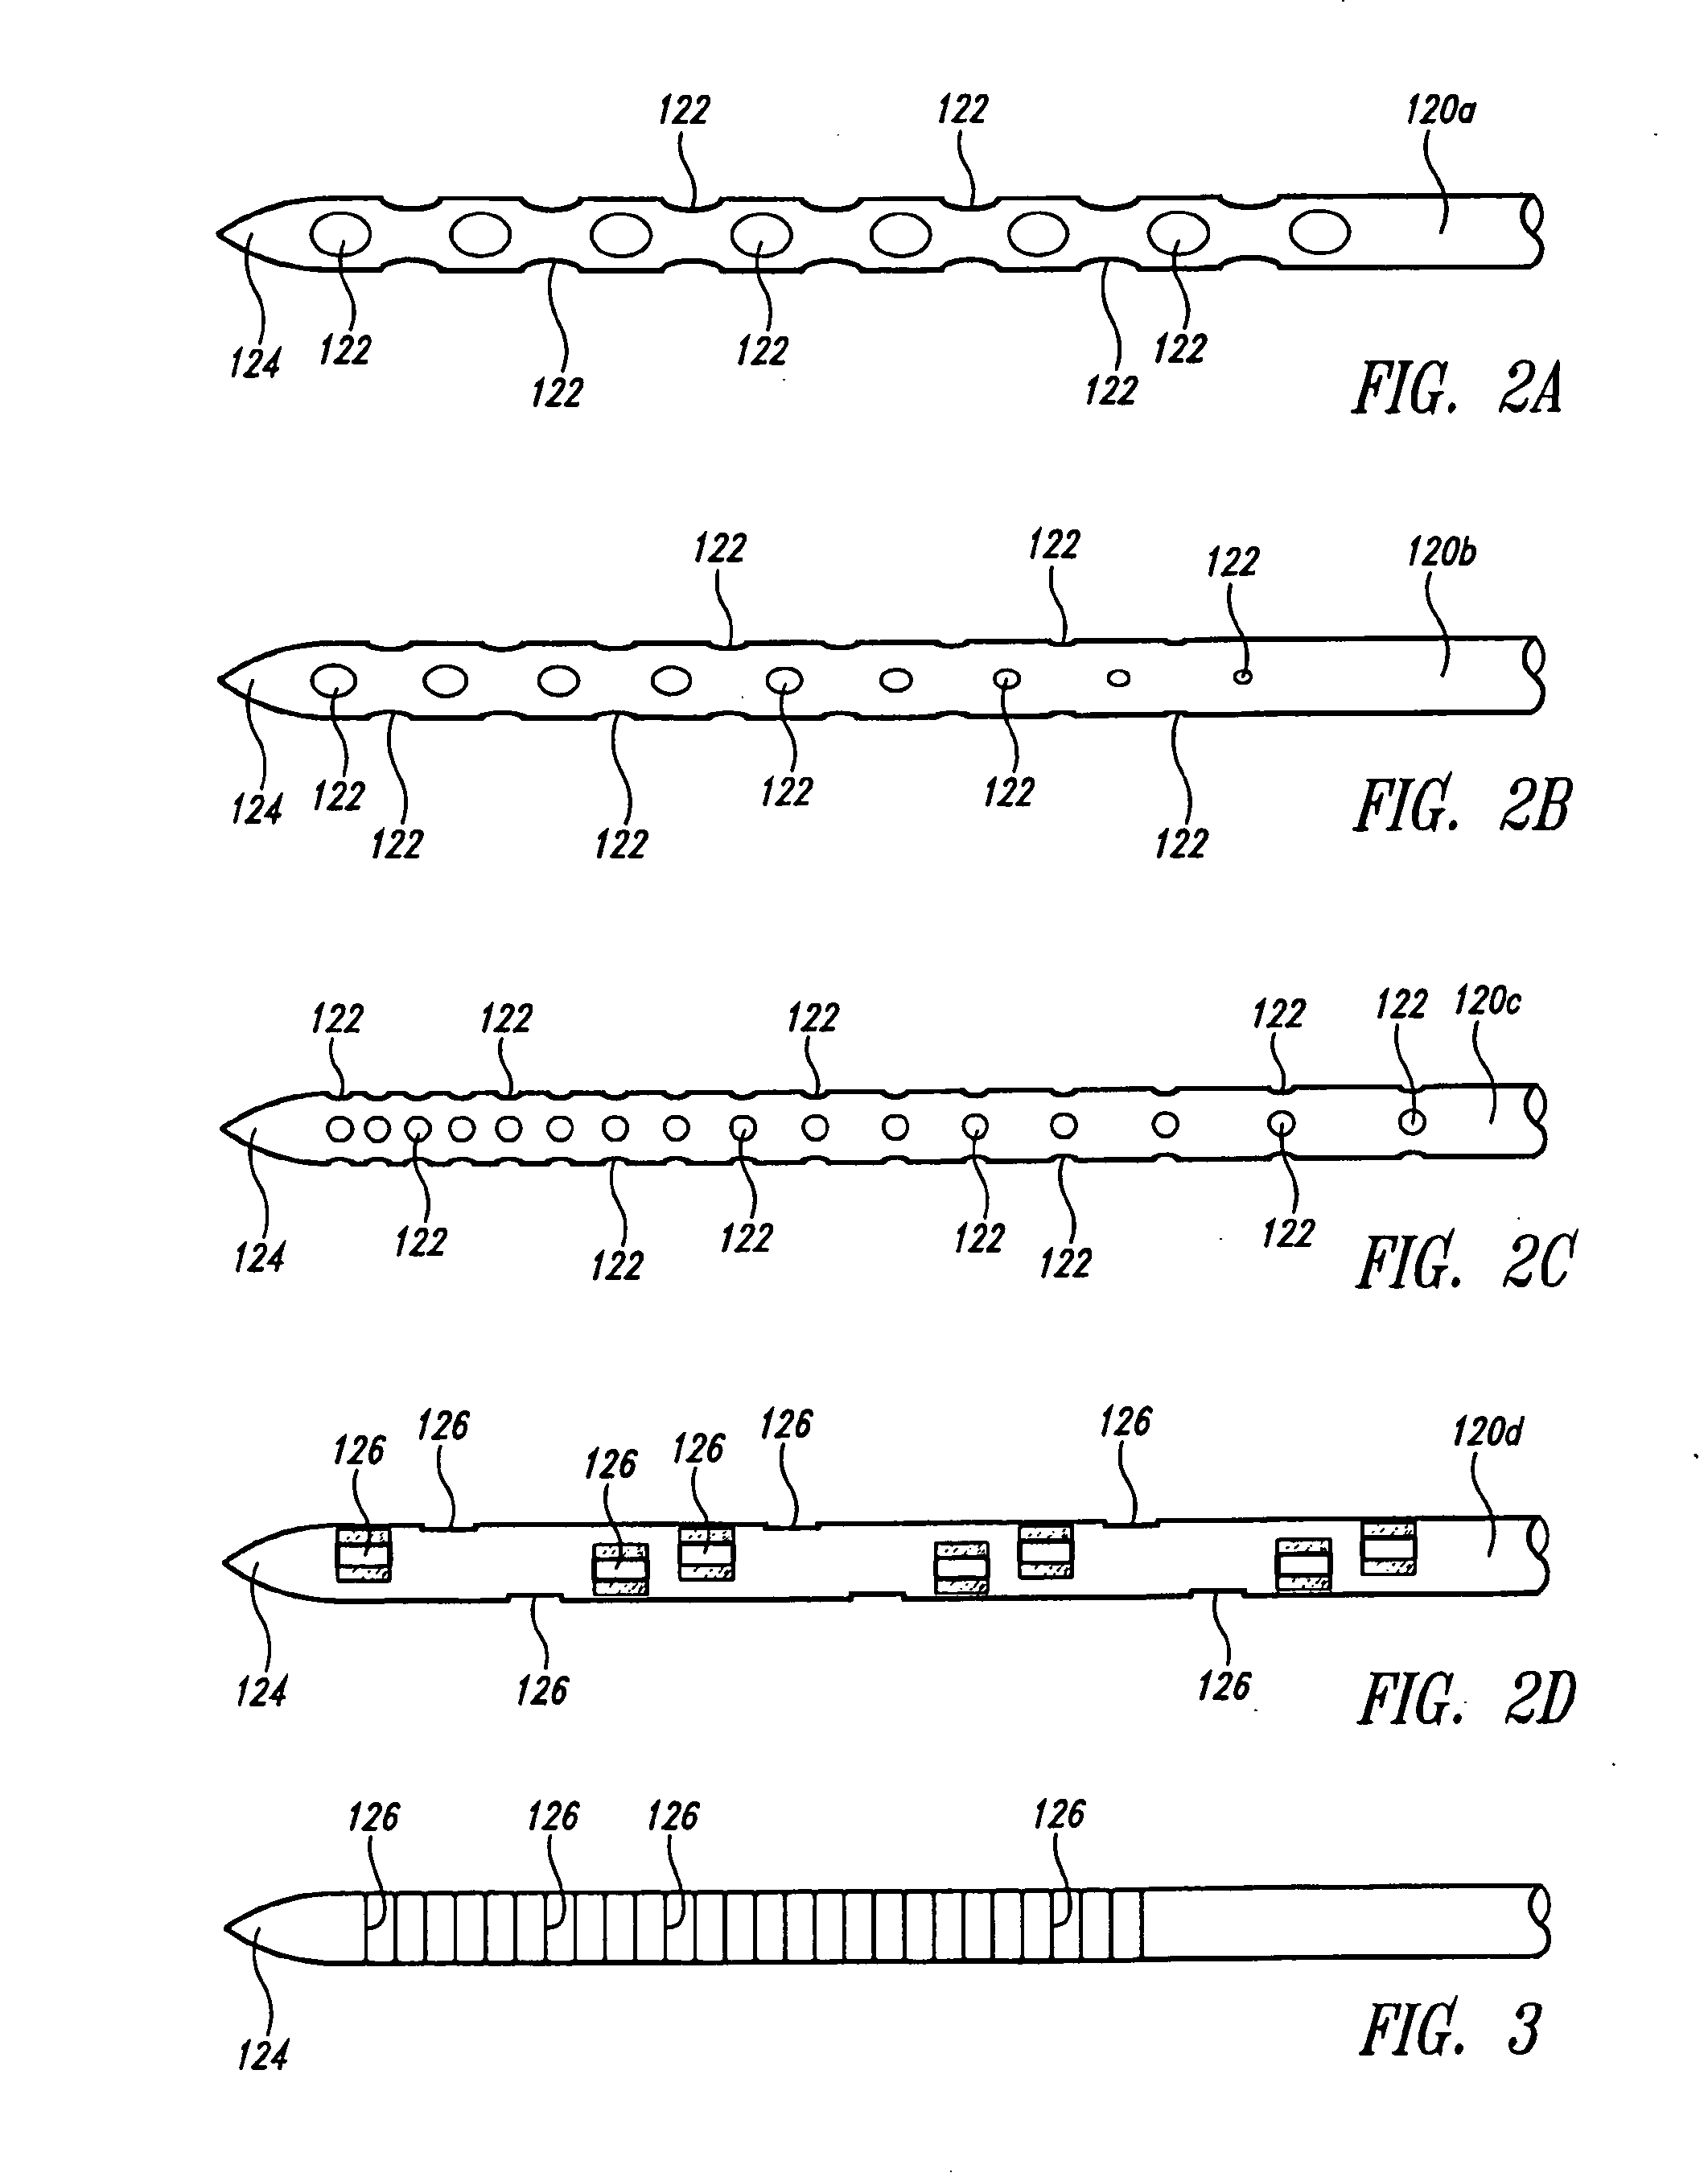 Needle array assembly and method for delivering therapeutic agents